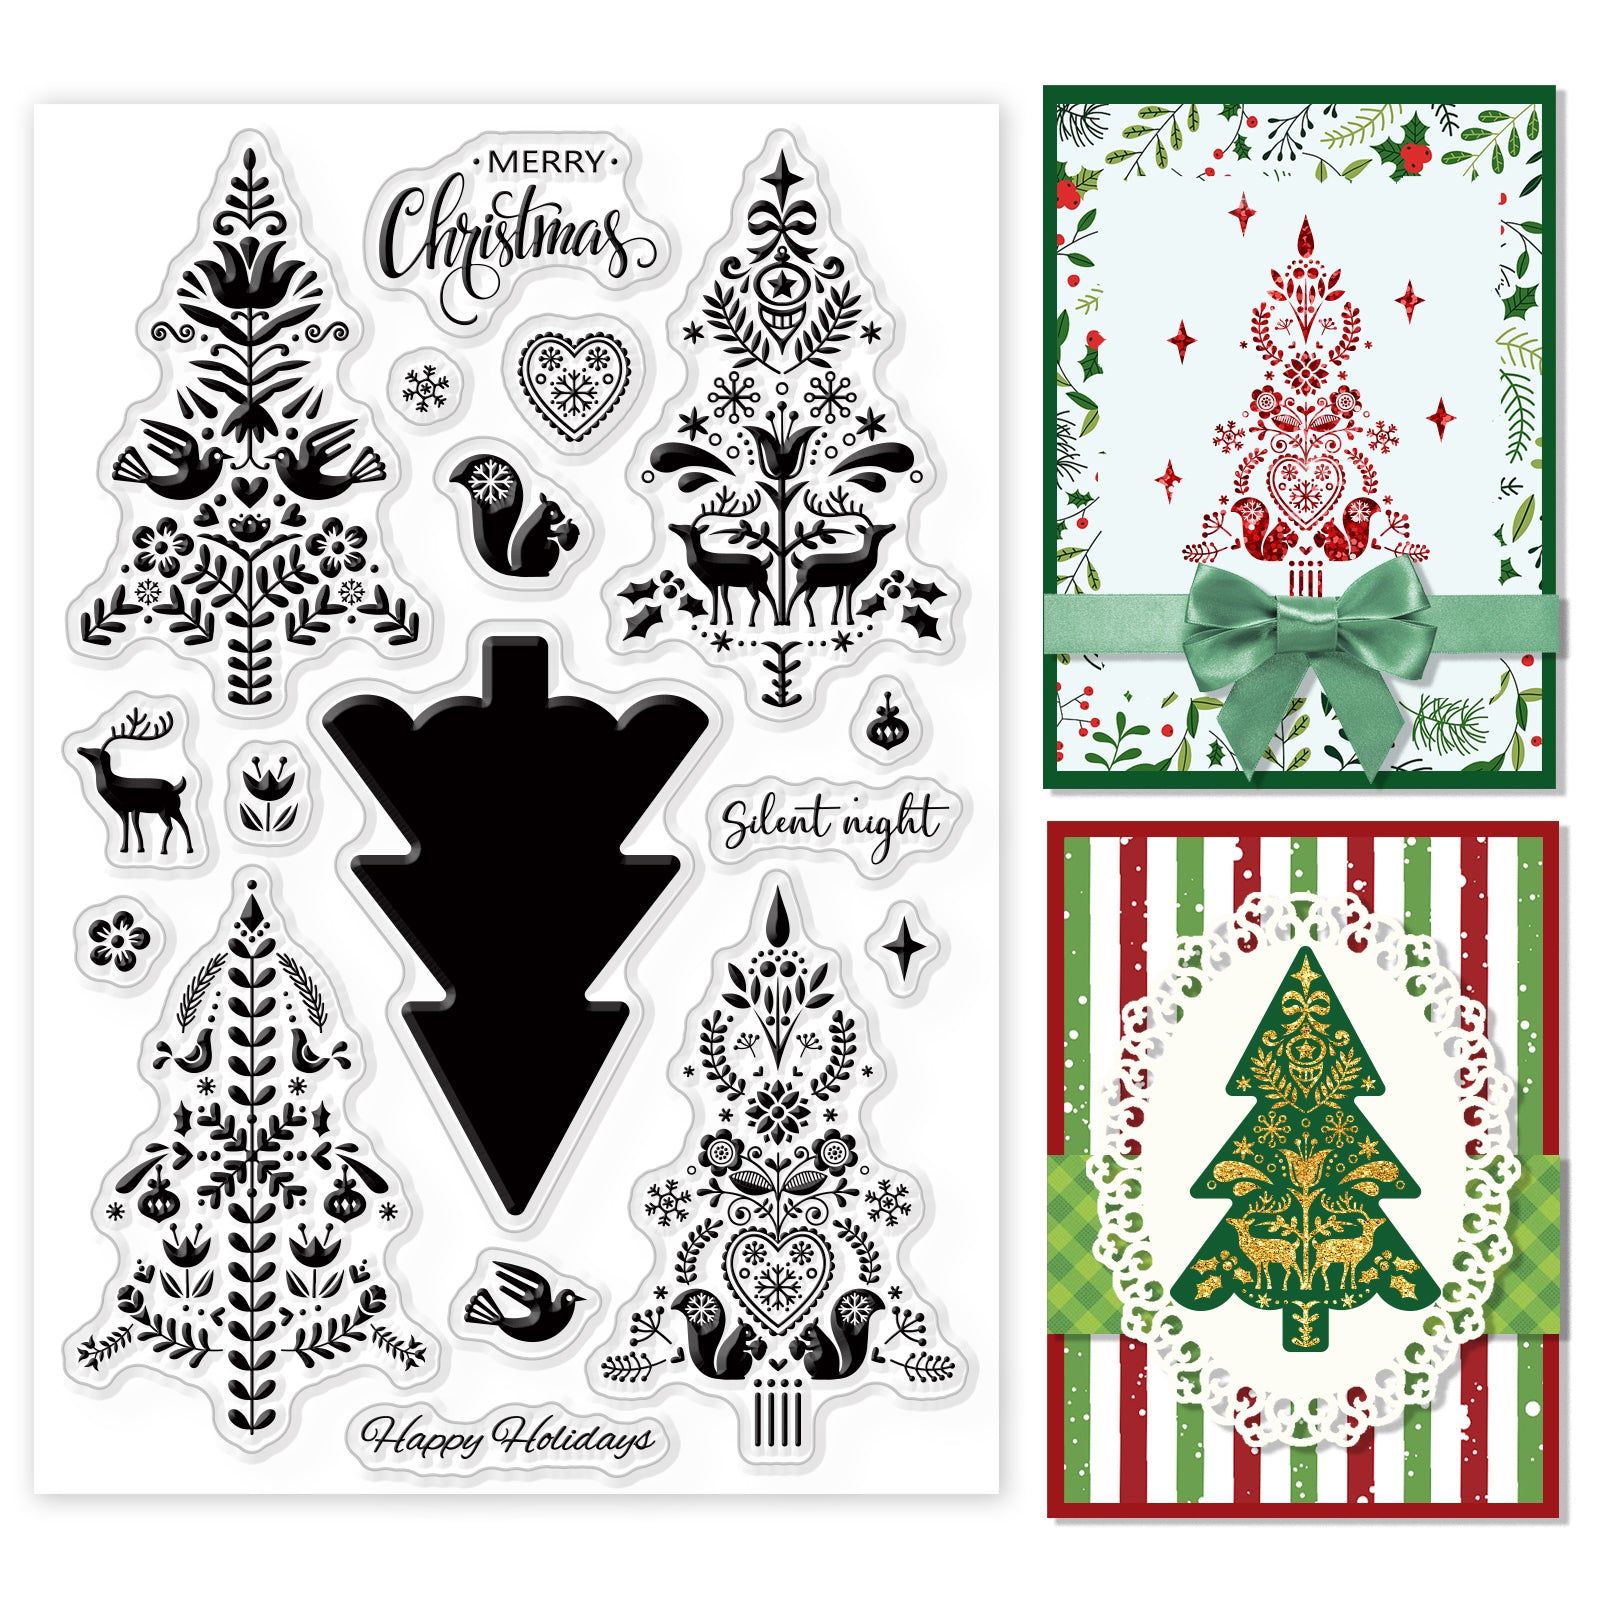 Globleland Christmas Tree, Layered, Folk Art Clear Stamps Seal for Card Making Decoration and DIY Scrapbooking